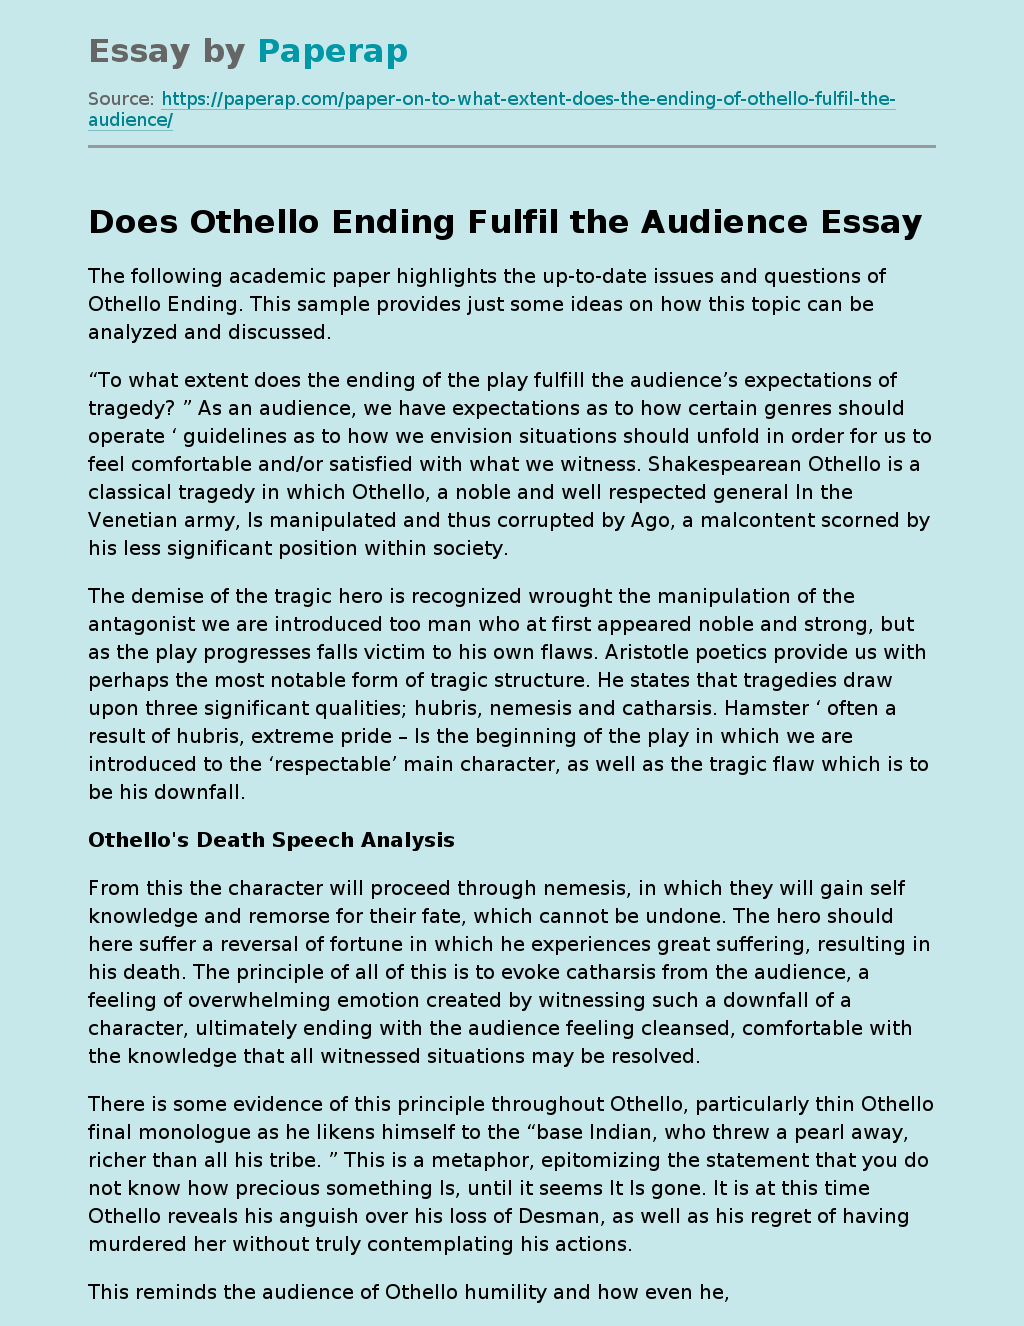 Does Othello Ending Fulfil the Audience